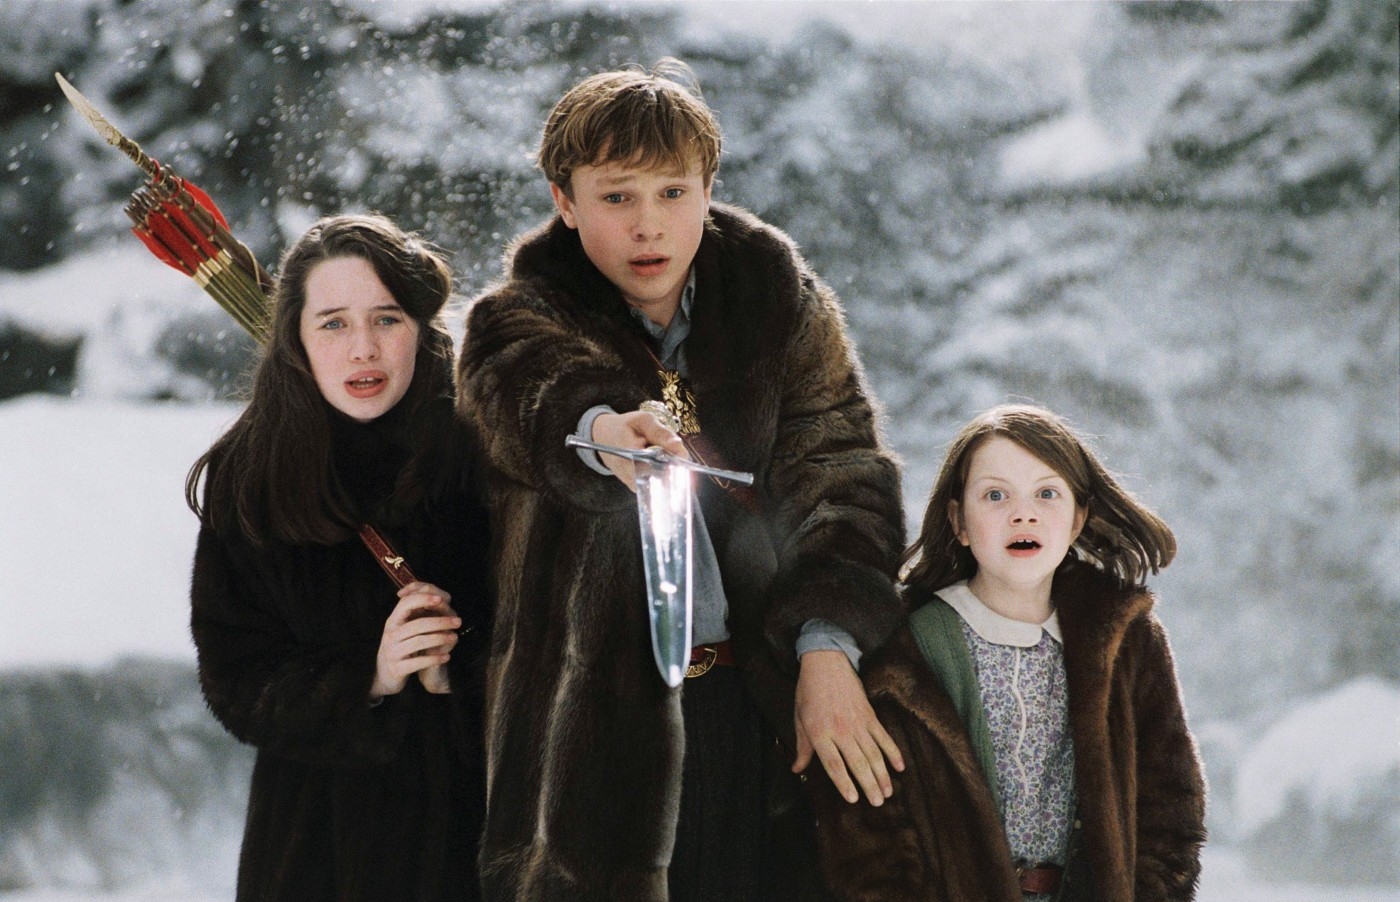 Cronicile Din Narnia 1 Film Online Subtitrat Imagini The Chronicles of Narnia: The Lion, the Witch and the Wardrobe